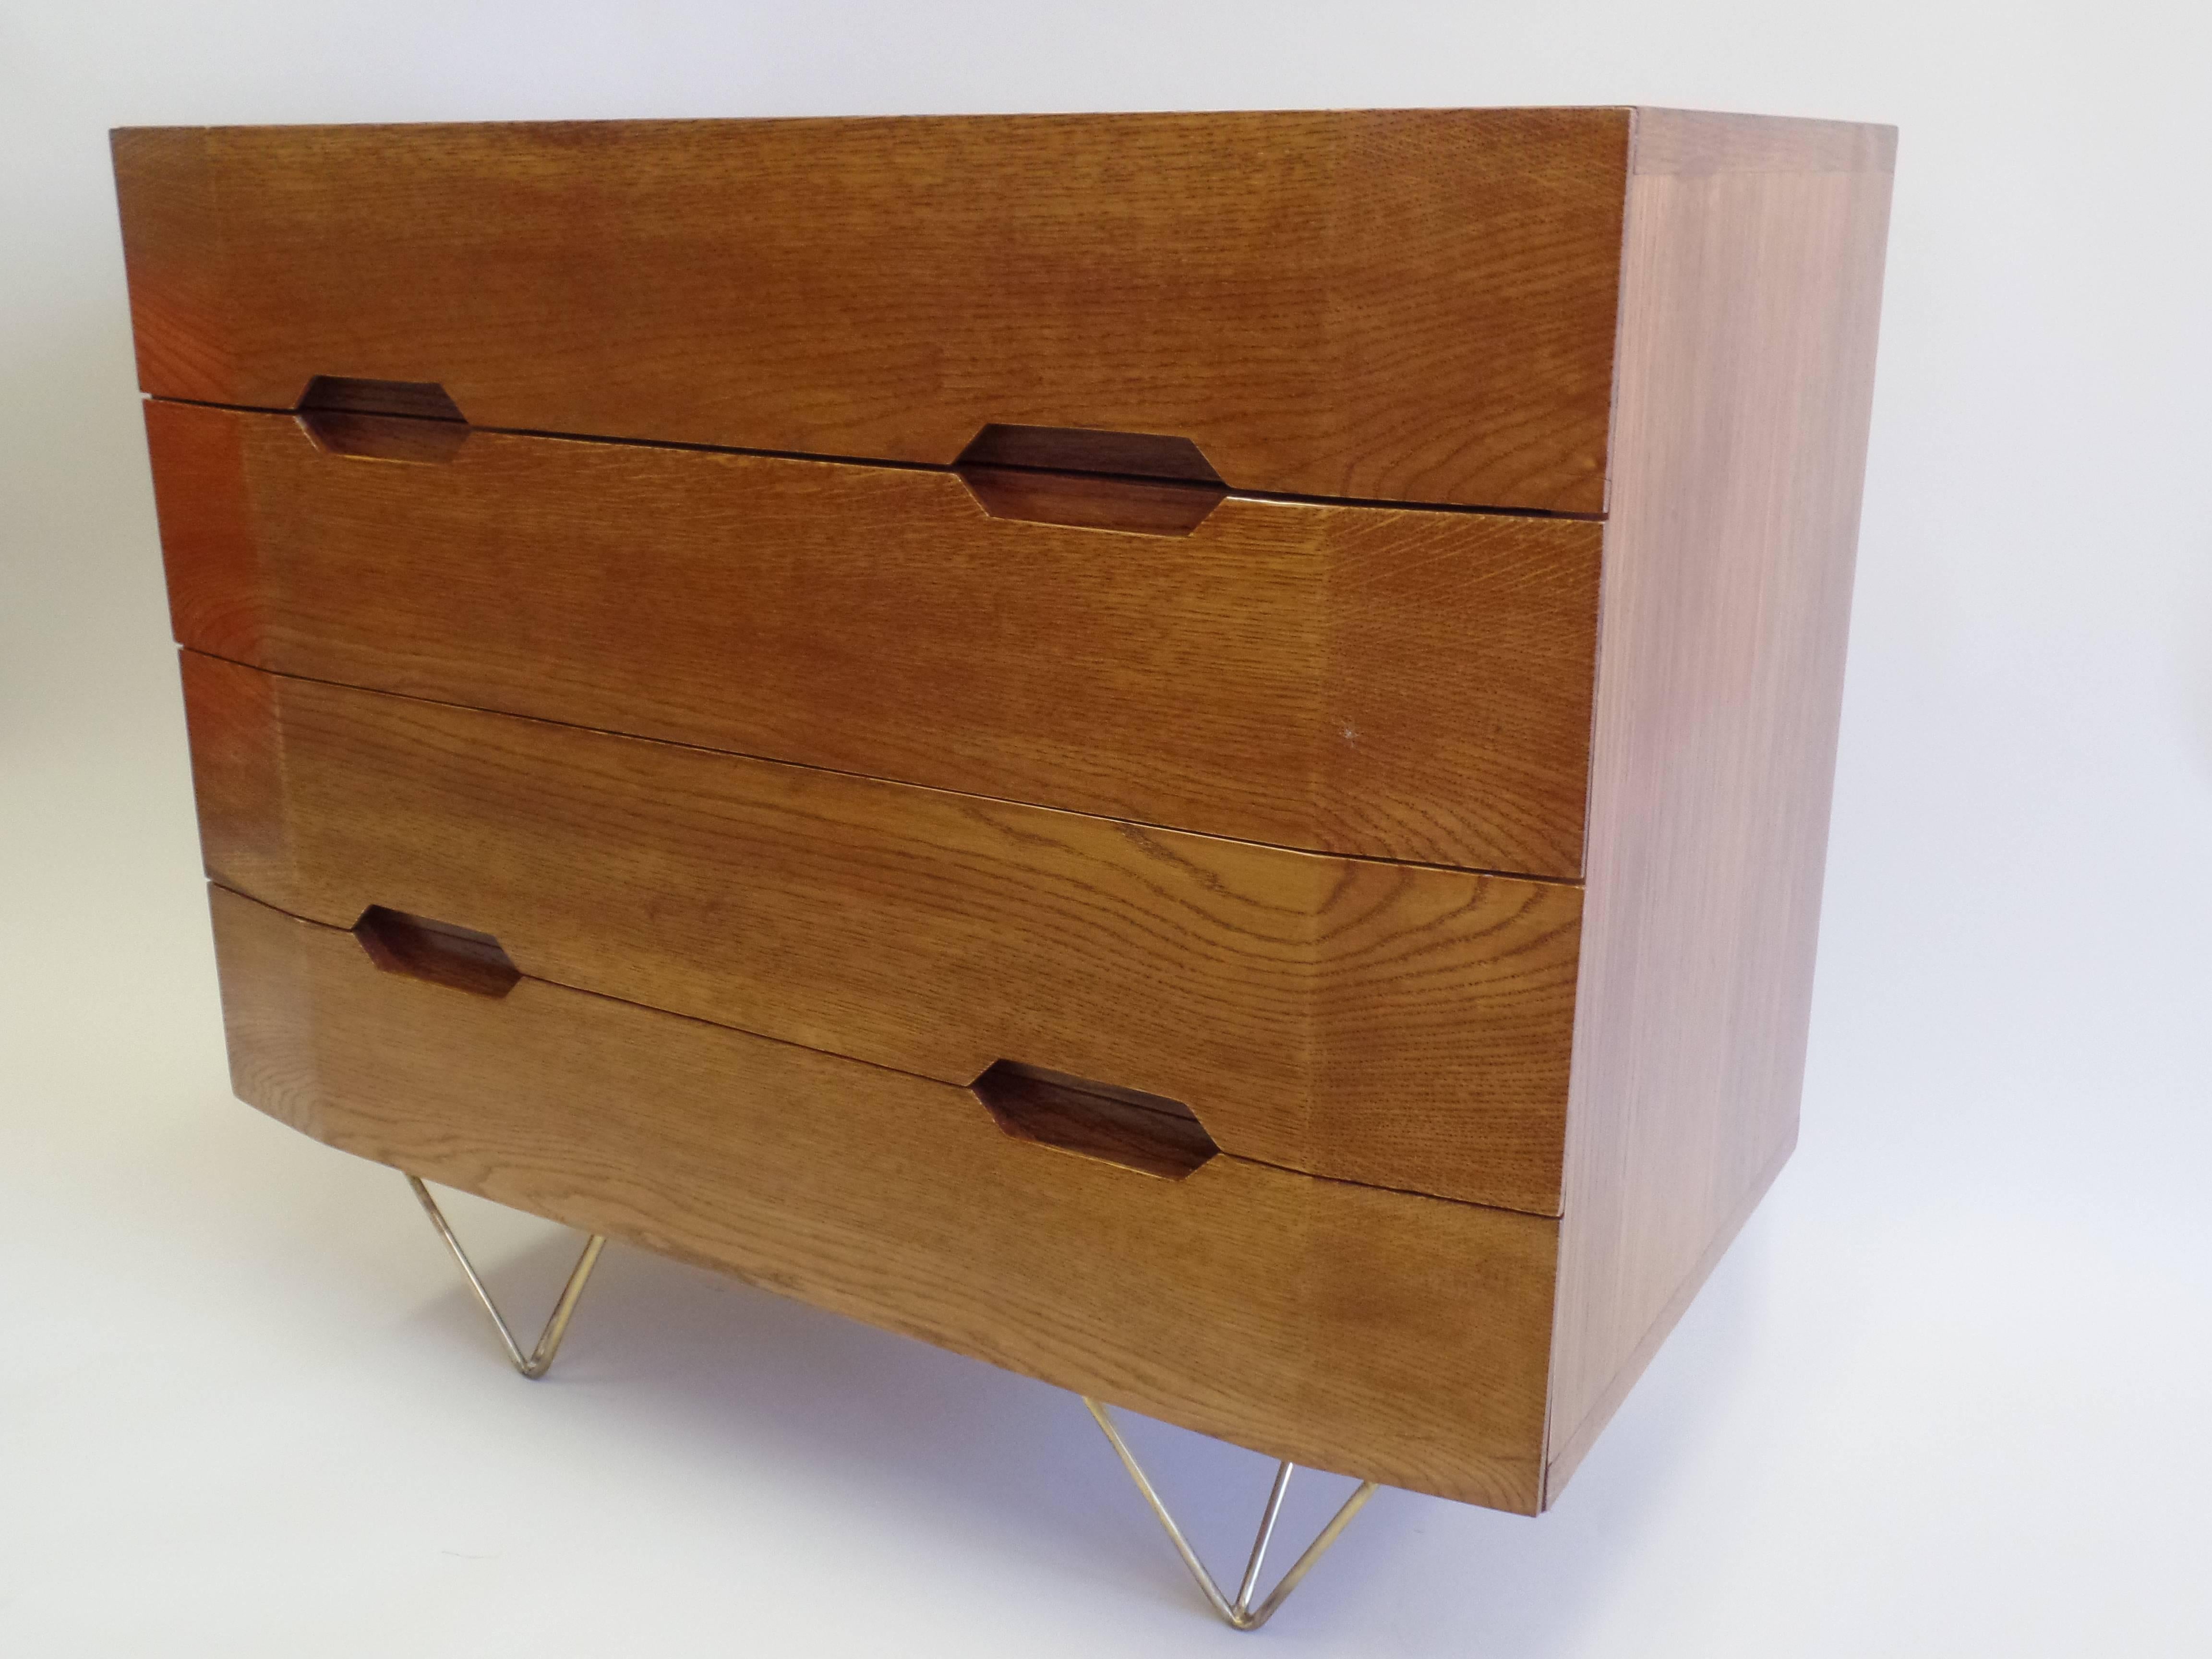 Pair of Italian Mid-Century Modern chests of drawers / dressers or commodes from the circle of Gio Ponti. Priced and sold as a pair.

The pieces are a mixture of exquisite form and subtle volumes suspended on tapered transparent brass tripod legs.